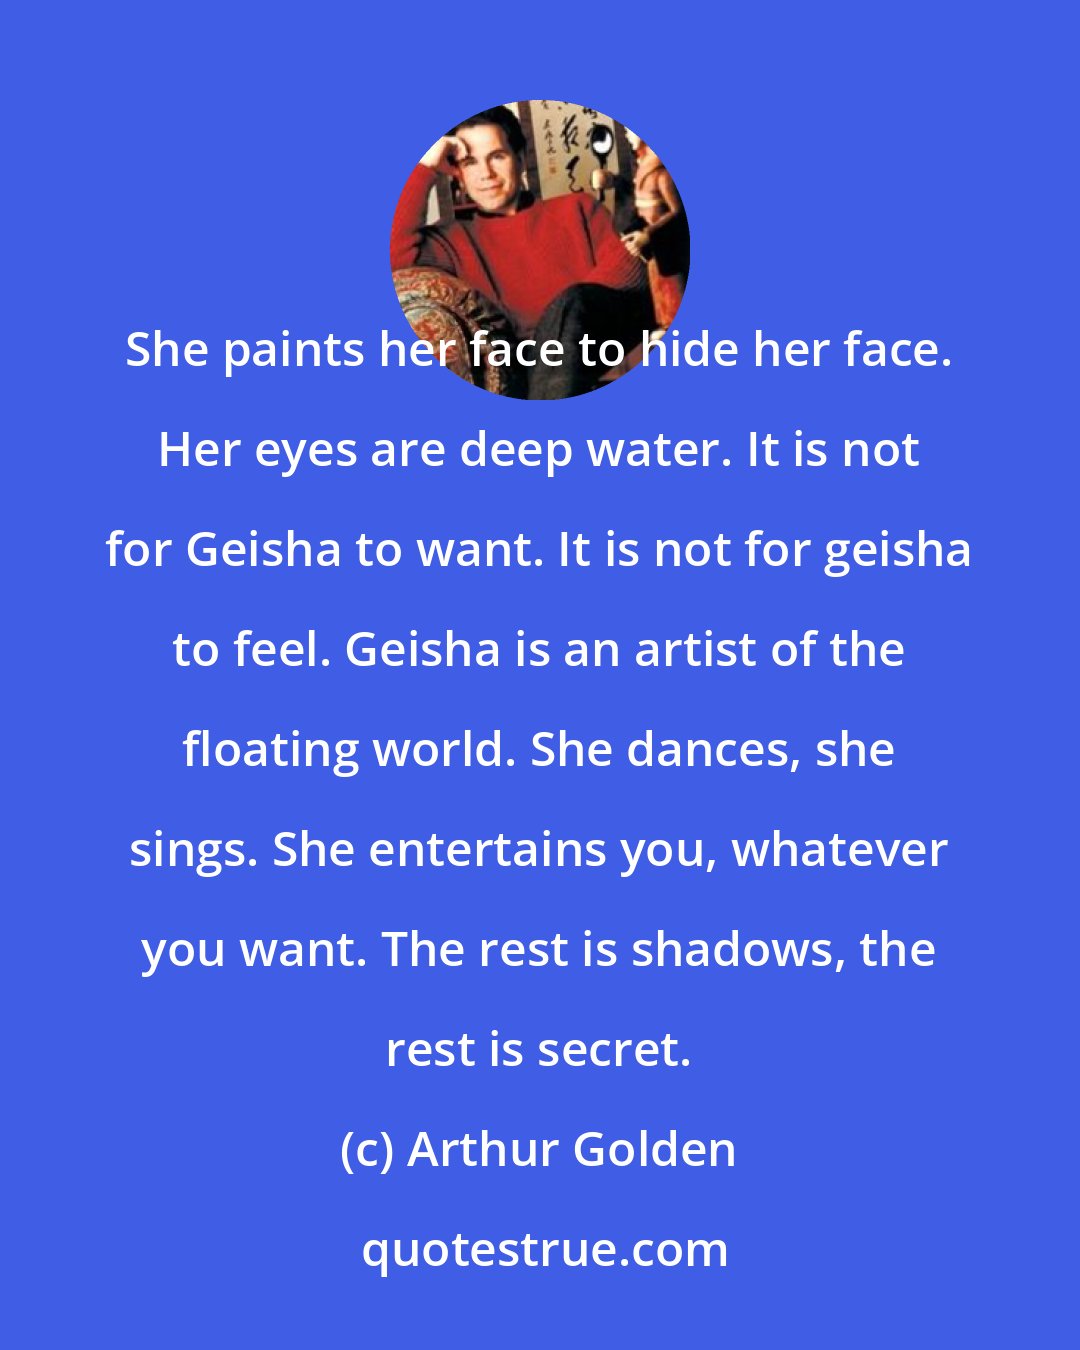 Arthur Golden: She paints her face to hide her face. Her eyes are deep water. It is not for Geisha to want. It is not for geisha to feel. Geisha is an artist of the floating world. She dances, she sings. She entertains you, whatever you want. The rest is shadows, the rest is secret.